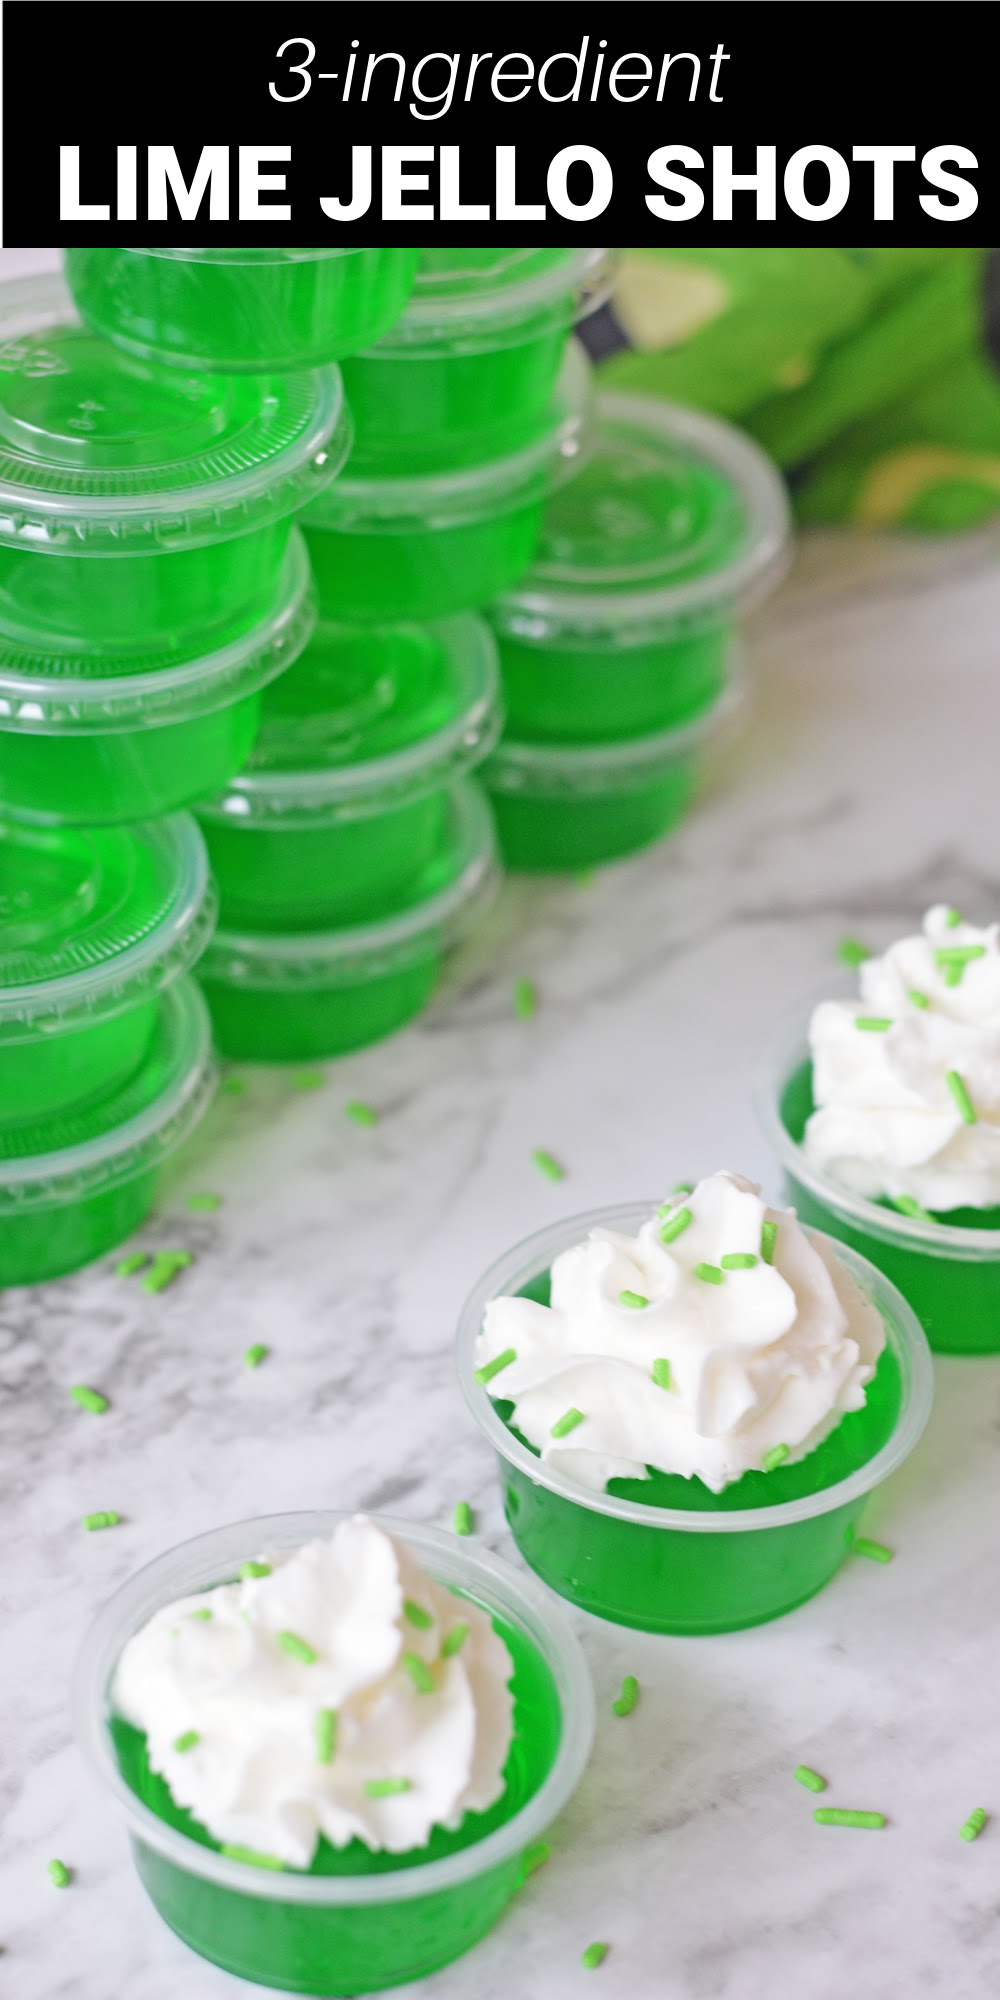 These vibrant Green Jello Shots are the perfect adult treat that are just in time for all your St. Patrick’s Day festivities. They’re an easy, delicious and funky twist on regular cocktail recipes that’s sure to be a huge hit with all of your party guests!